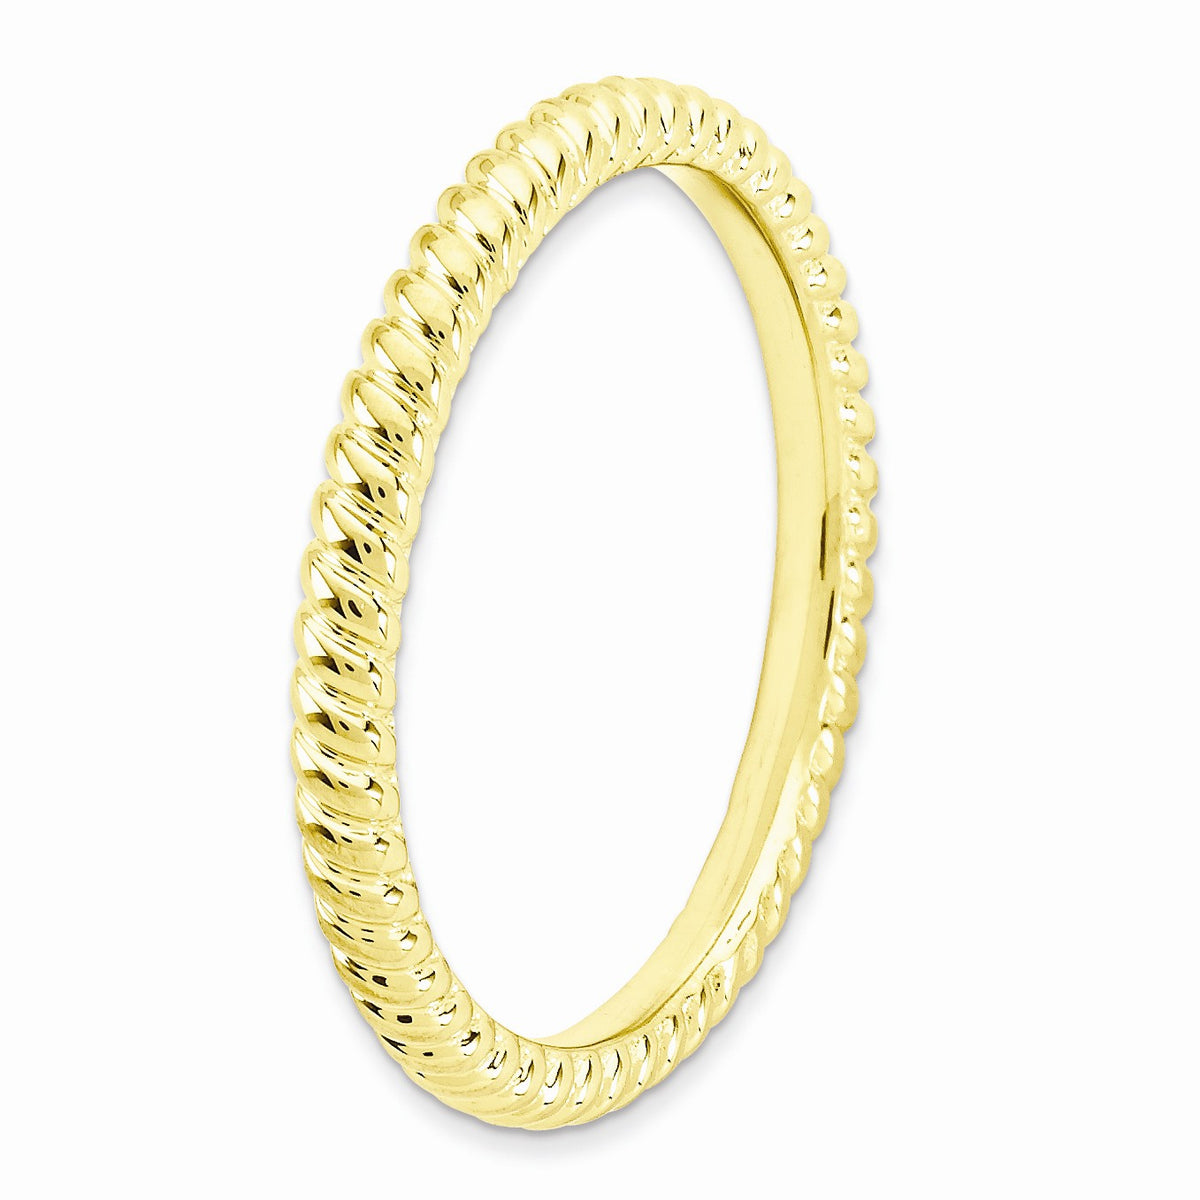 Alternate view of the 2.25mm 14k Yellow Gold Plated Sterling Silver Stackable Twisted Band by The Black Bow Jewelry Co.